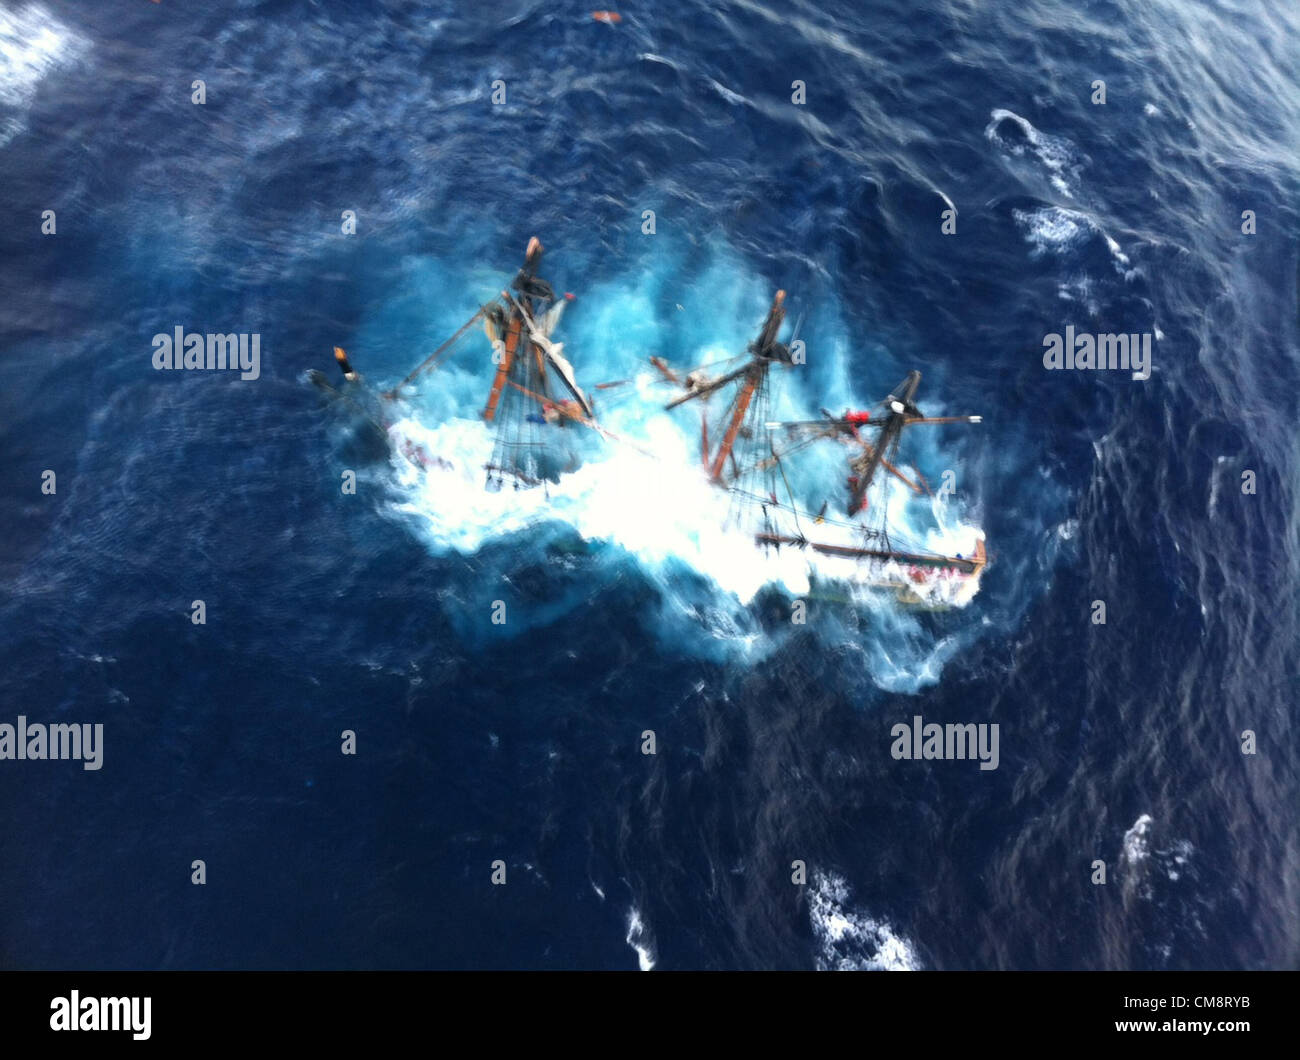 The HMS Bounty, a 180-foot replica 18th century sailing vessel sinks in the Atlantic Ocean during Hurricane Sandy October 29, 2012 90 miles southeast of Hatteras, NC. The Coast Guard rescued 14 crew members by helicopter. The body of a crew member was recovered, and one was still missing. Stock Photo